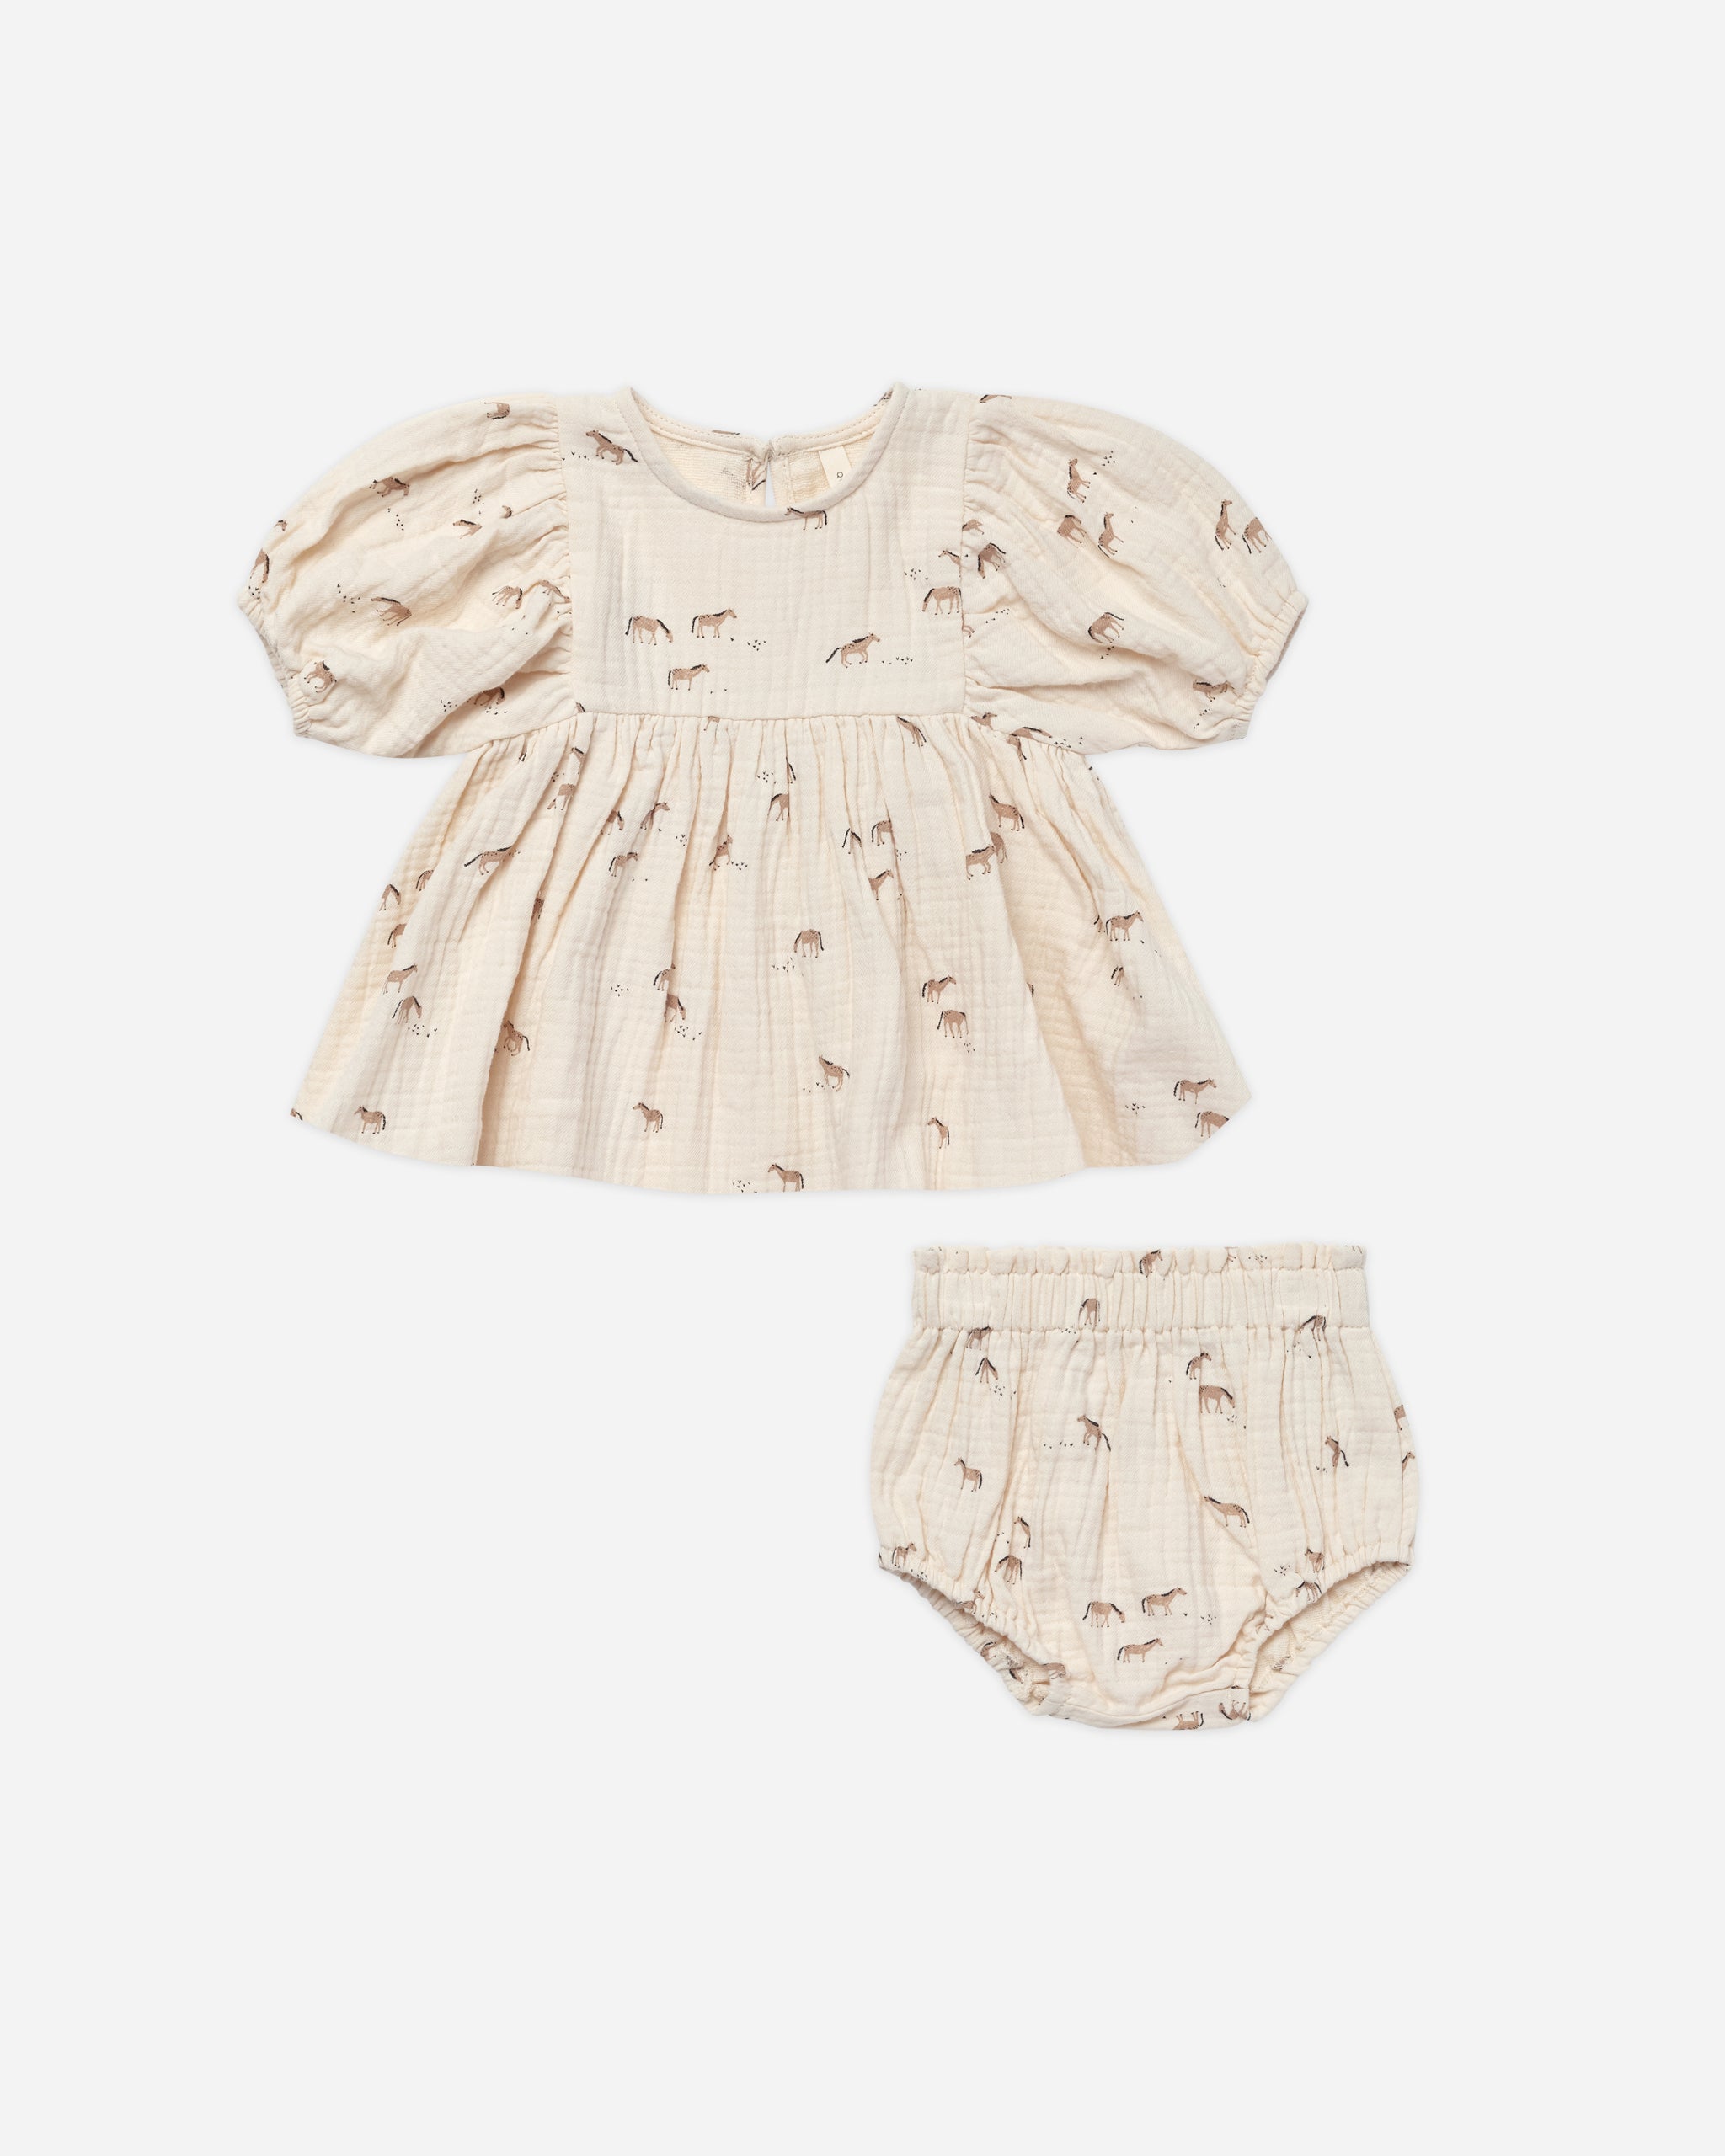 Francy Set || Horses - Rylee + Cru | Kids Clothes | Trendy Baby Clothes | Modern Infant Outfits |